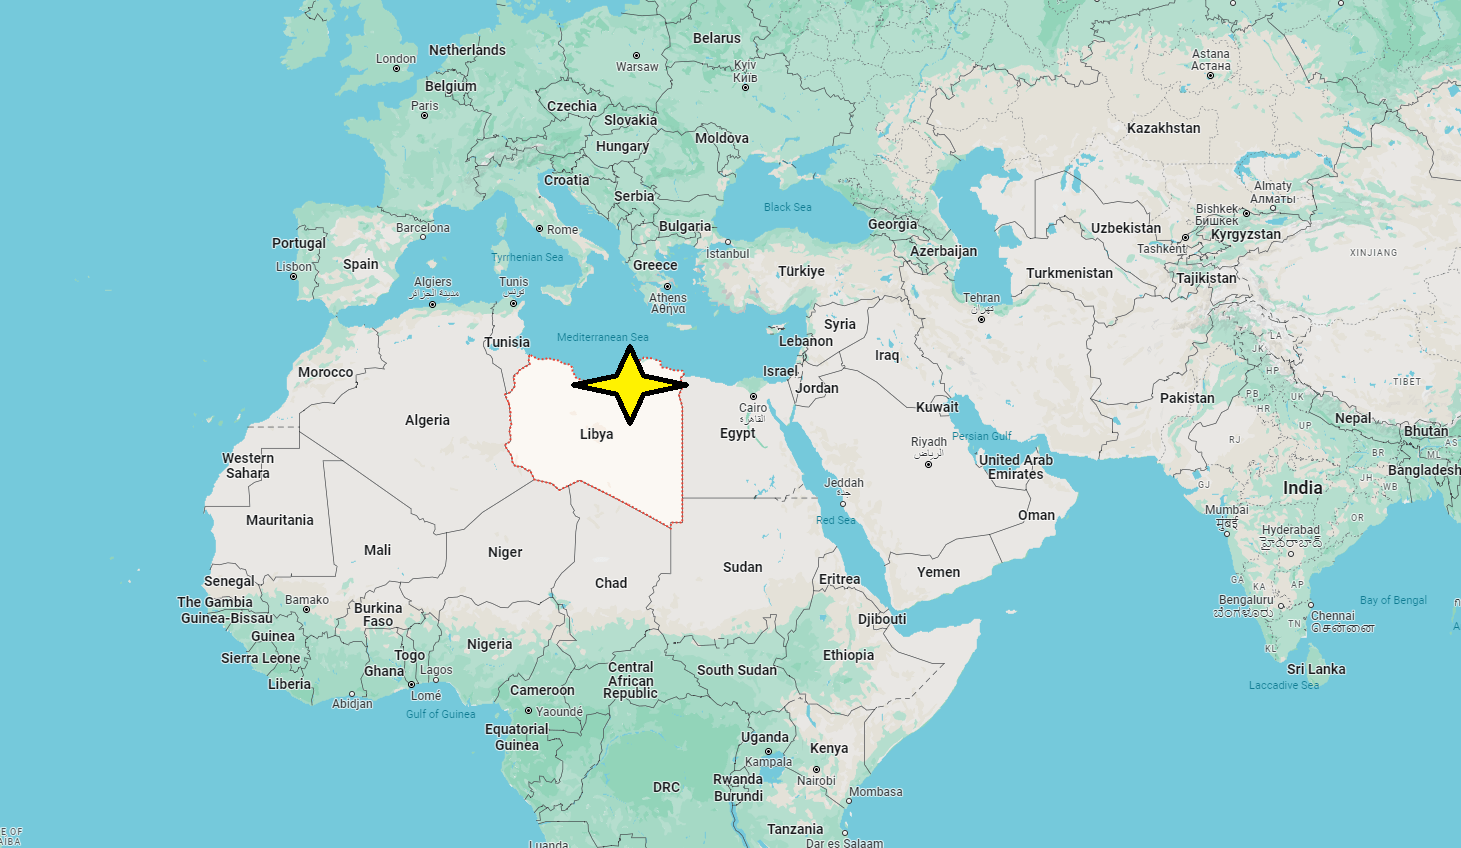 What Continent is Libya in